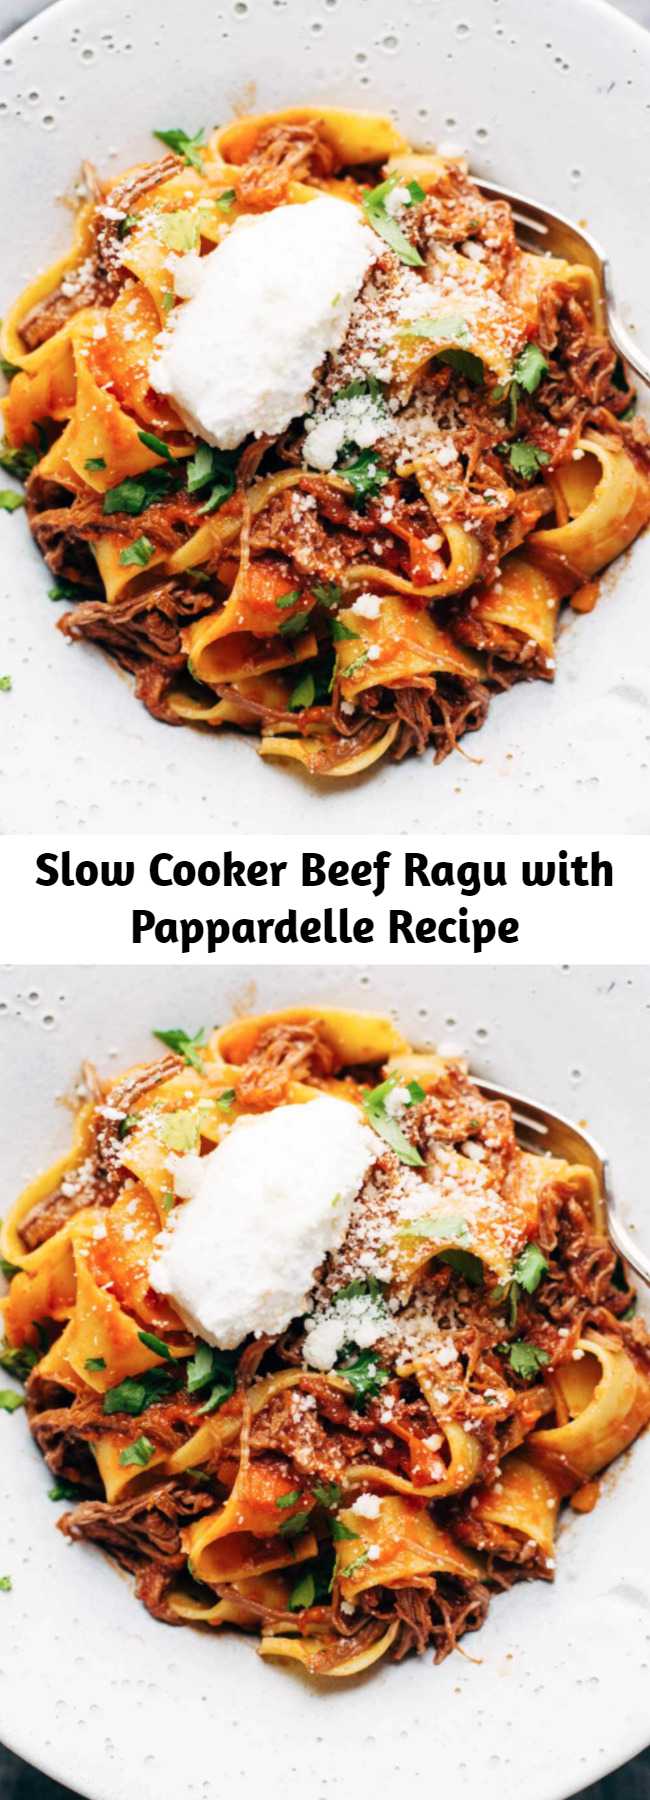 Slow Cooker Beef Ragu with Pappardelle Recipe - Easy comfort food #pasta #pappardelle #brunch